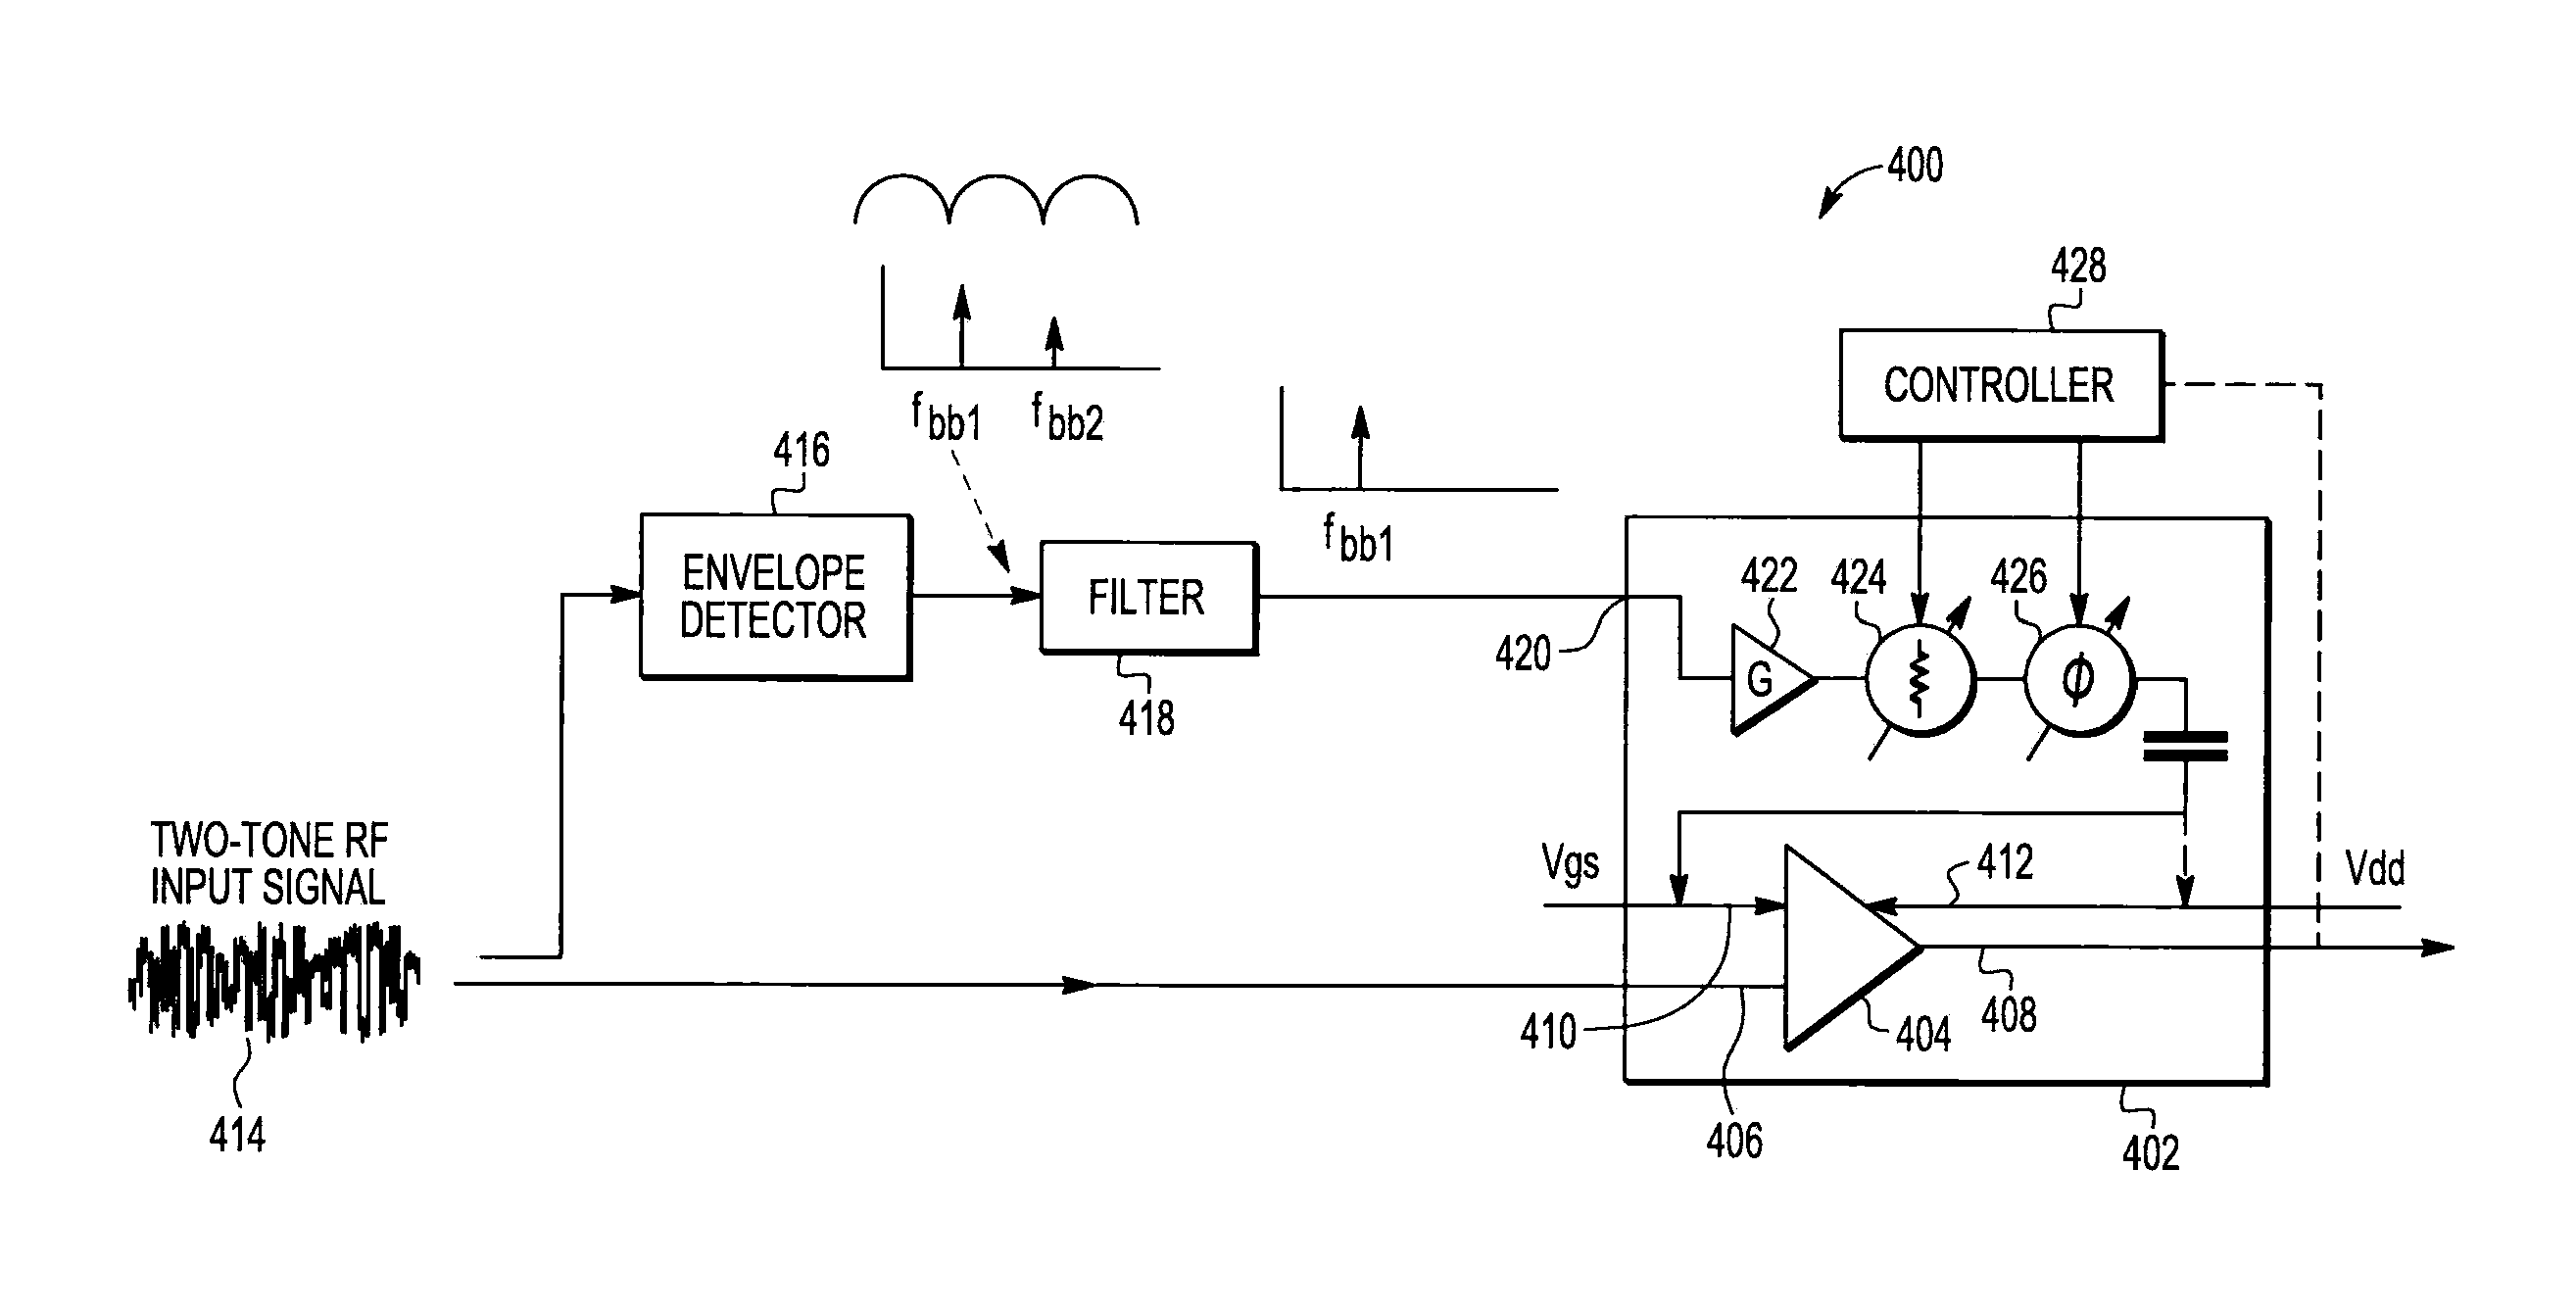 Power amplifier with envelope injection